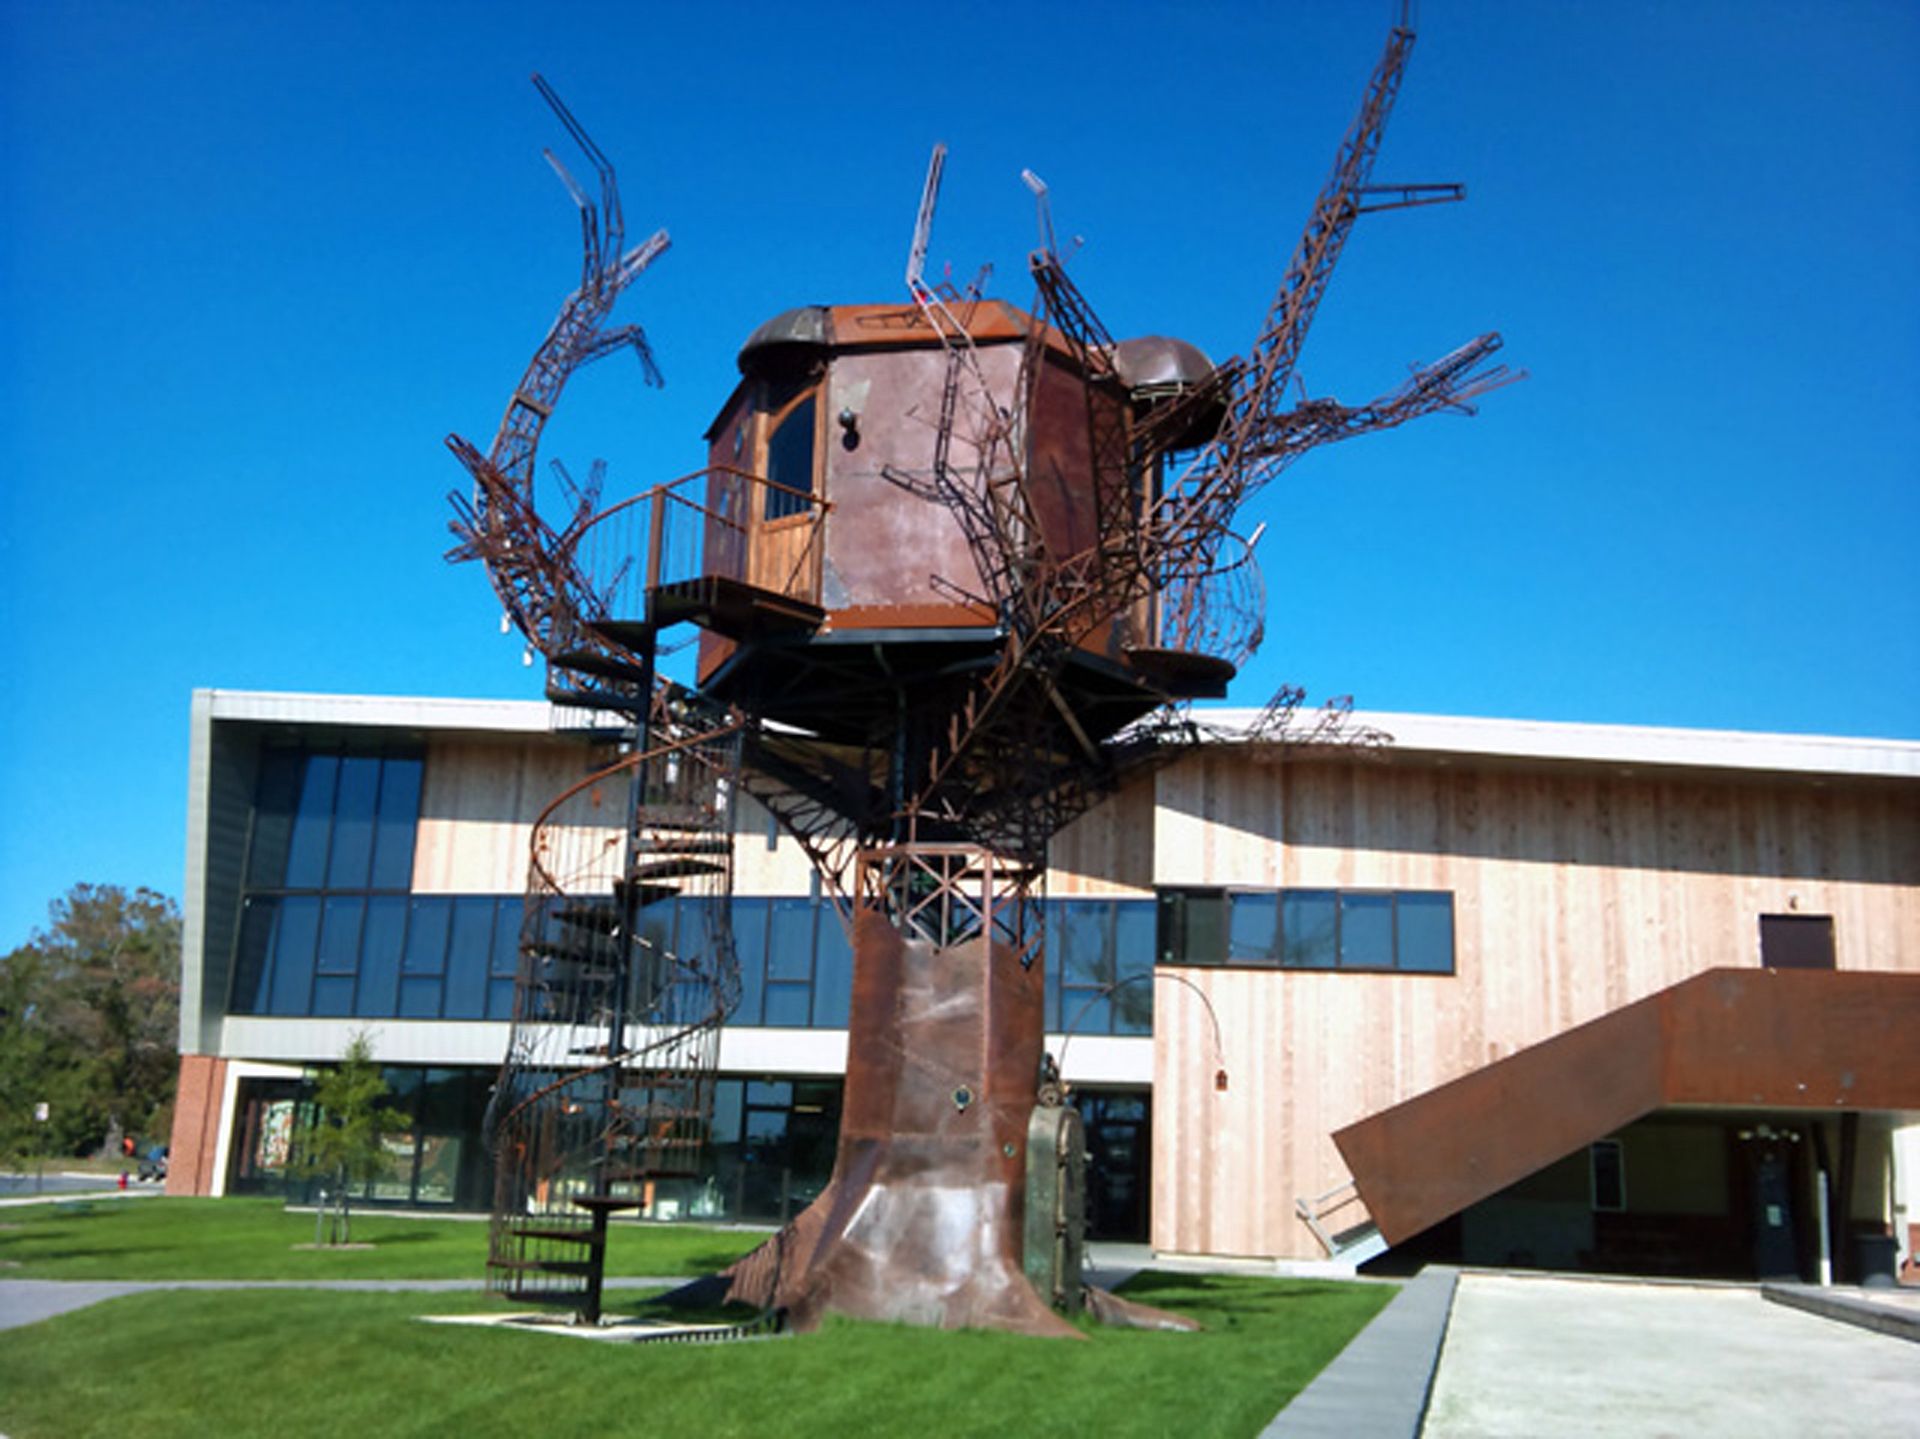 A large brown tree house sculpture placed outside in front of a building.